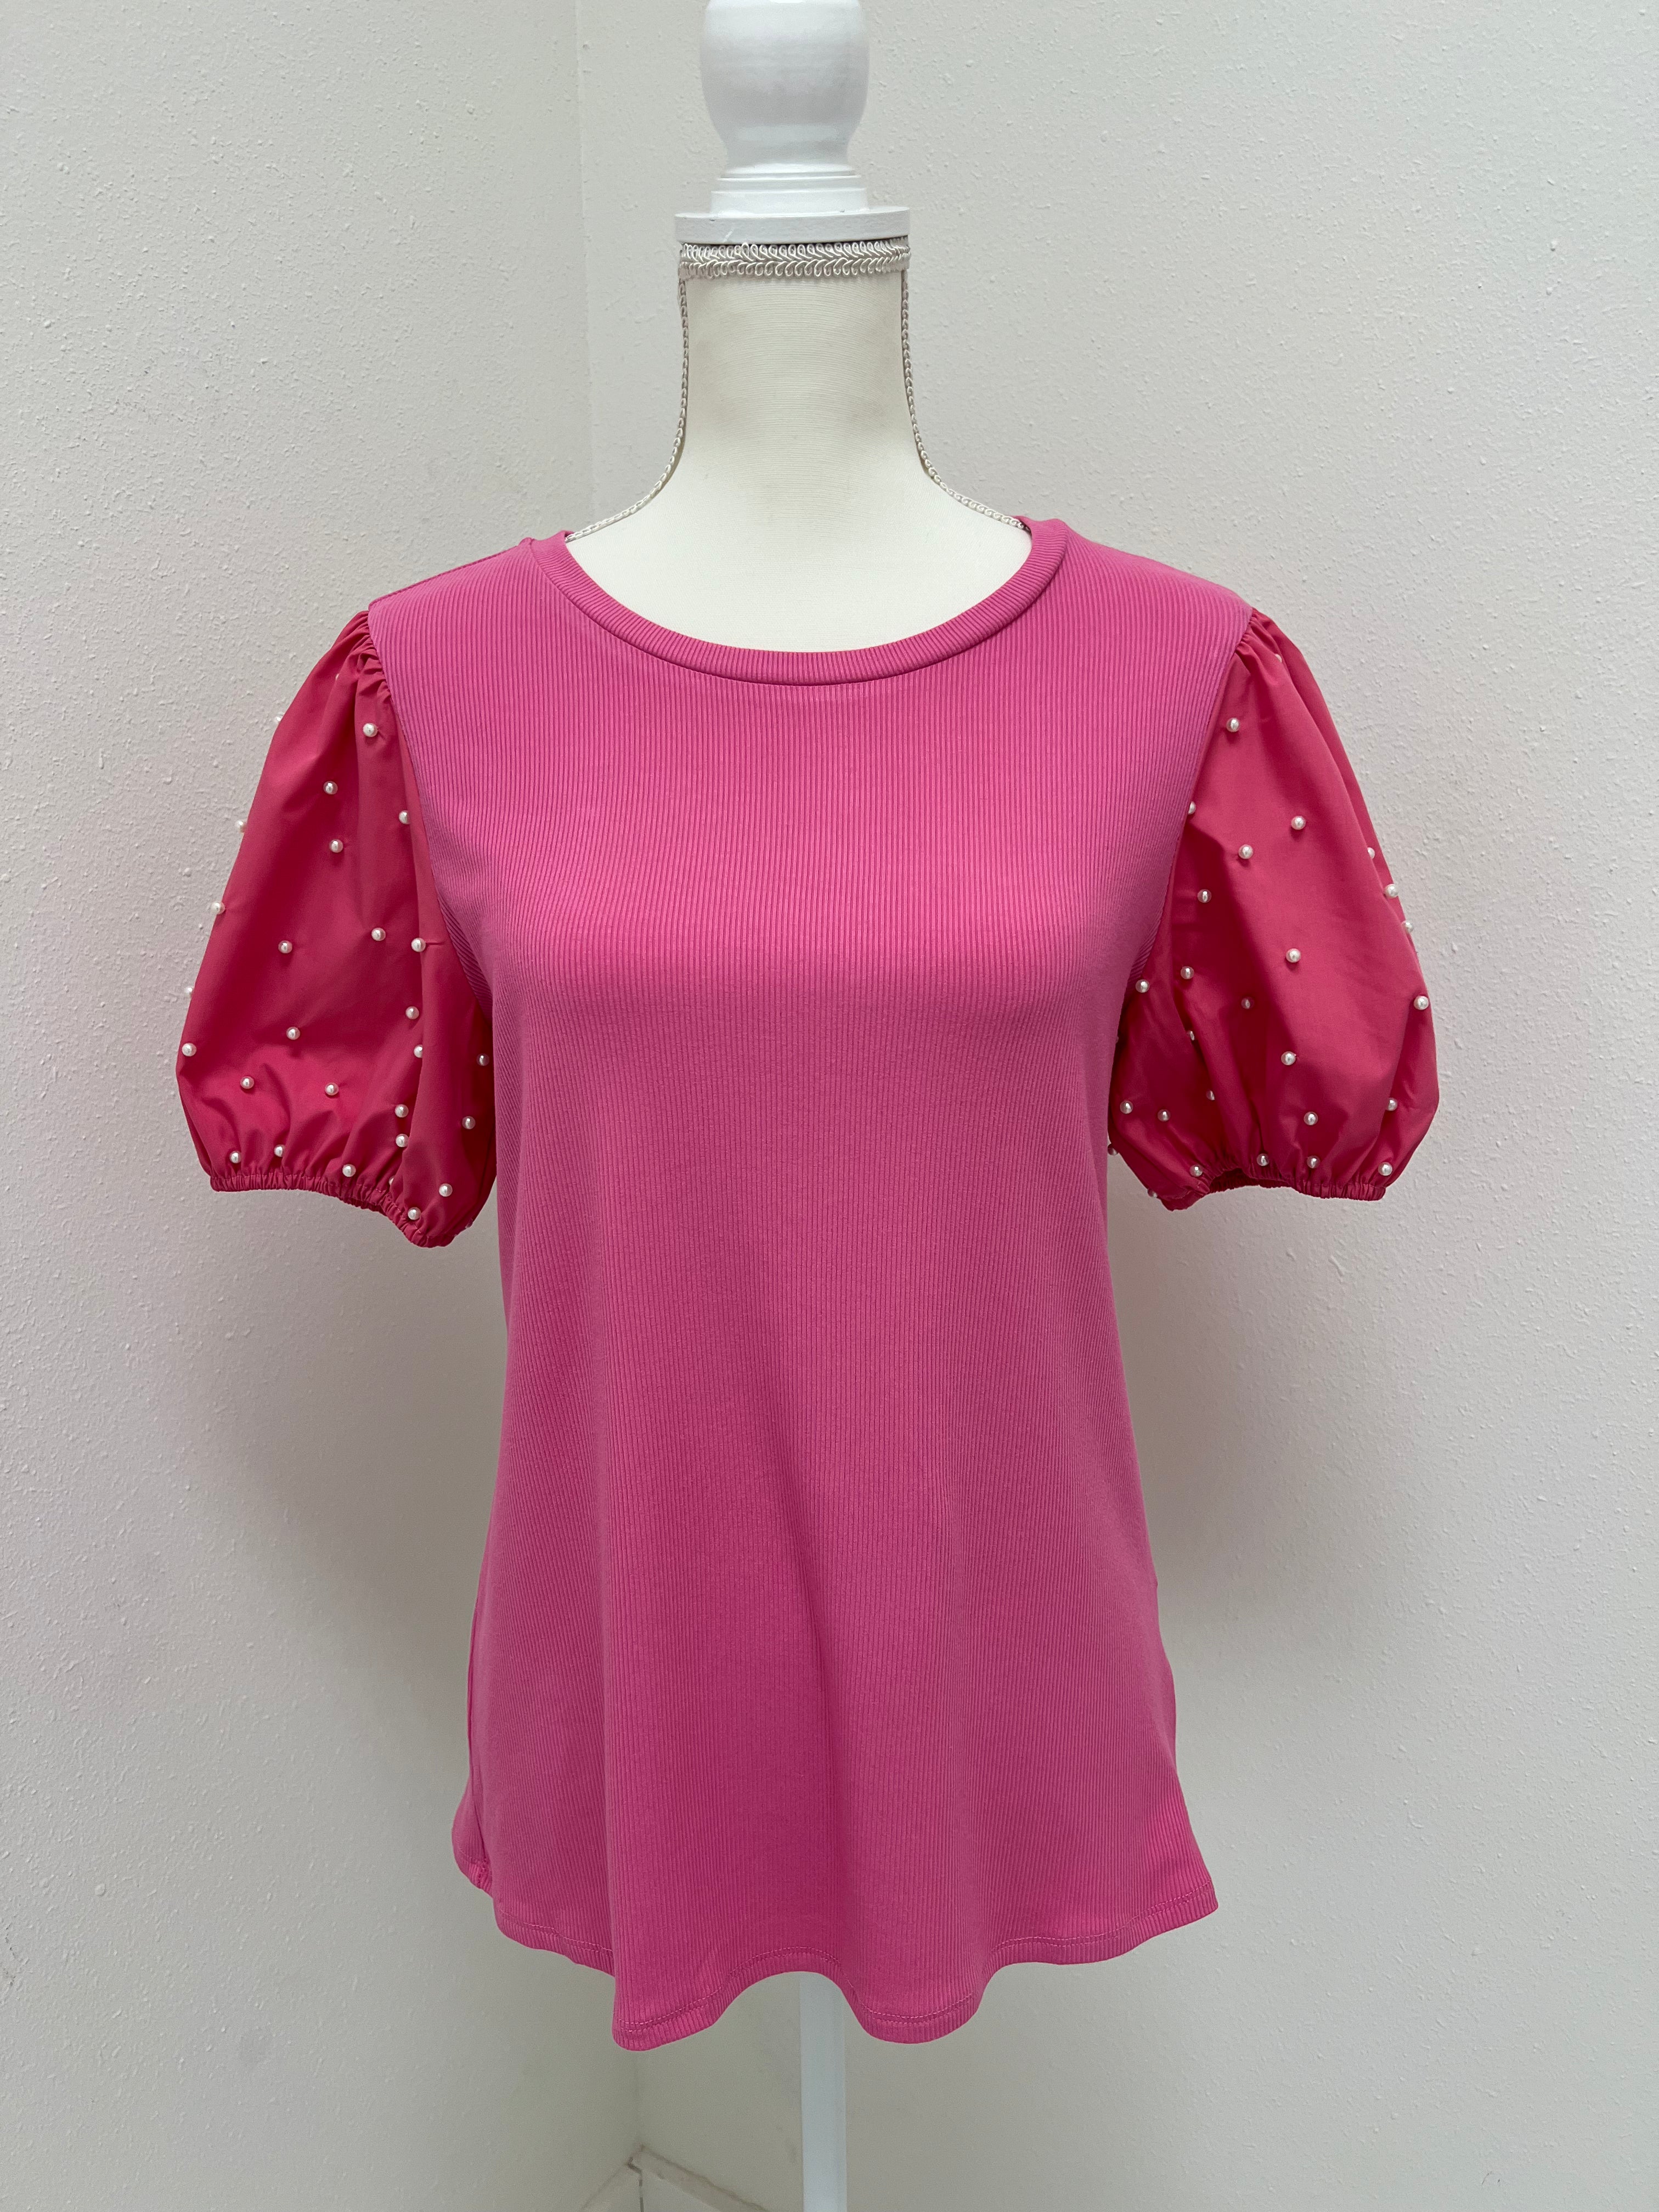 Pink top with short puff sleeves